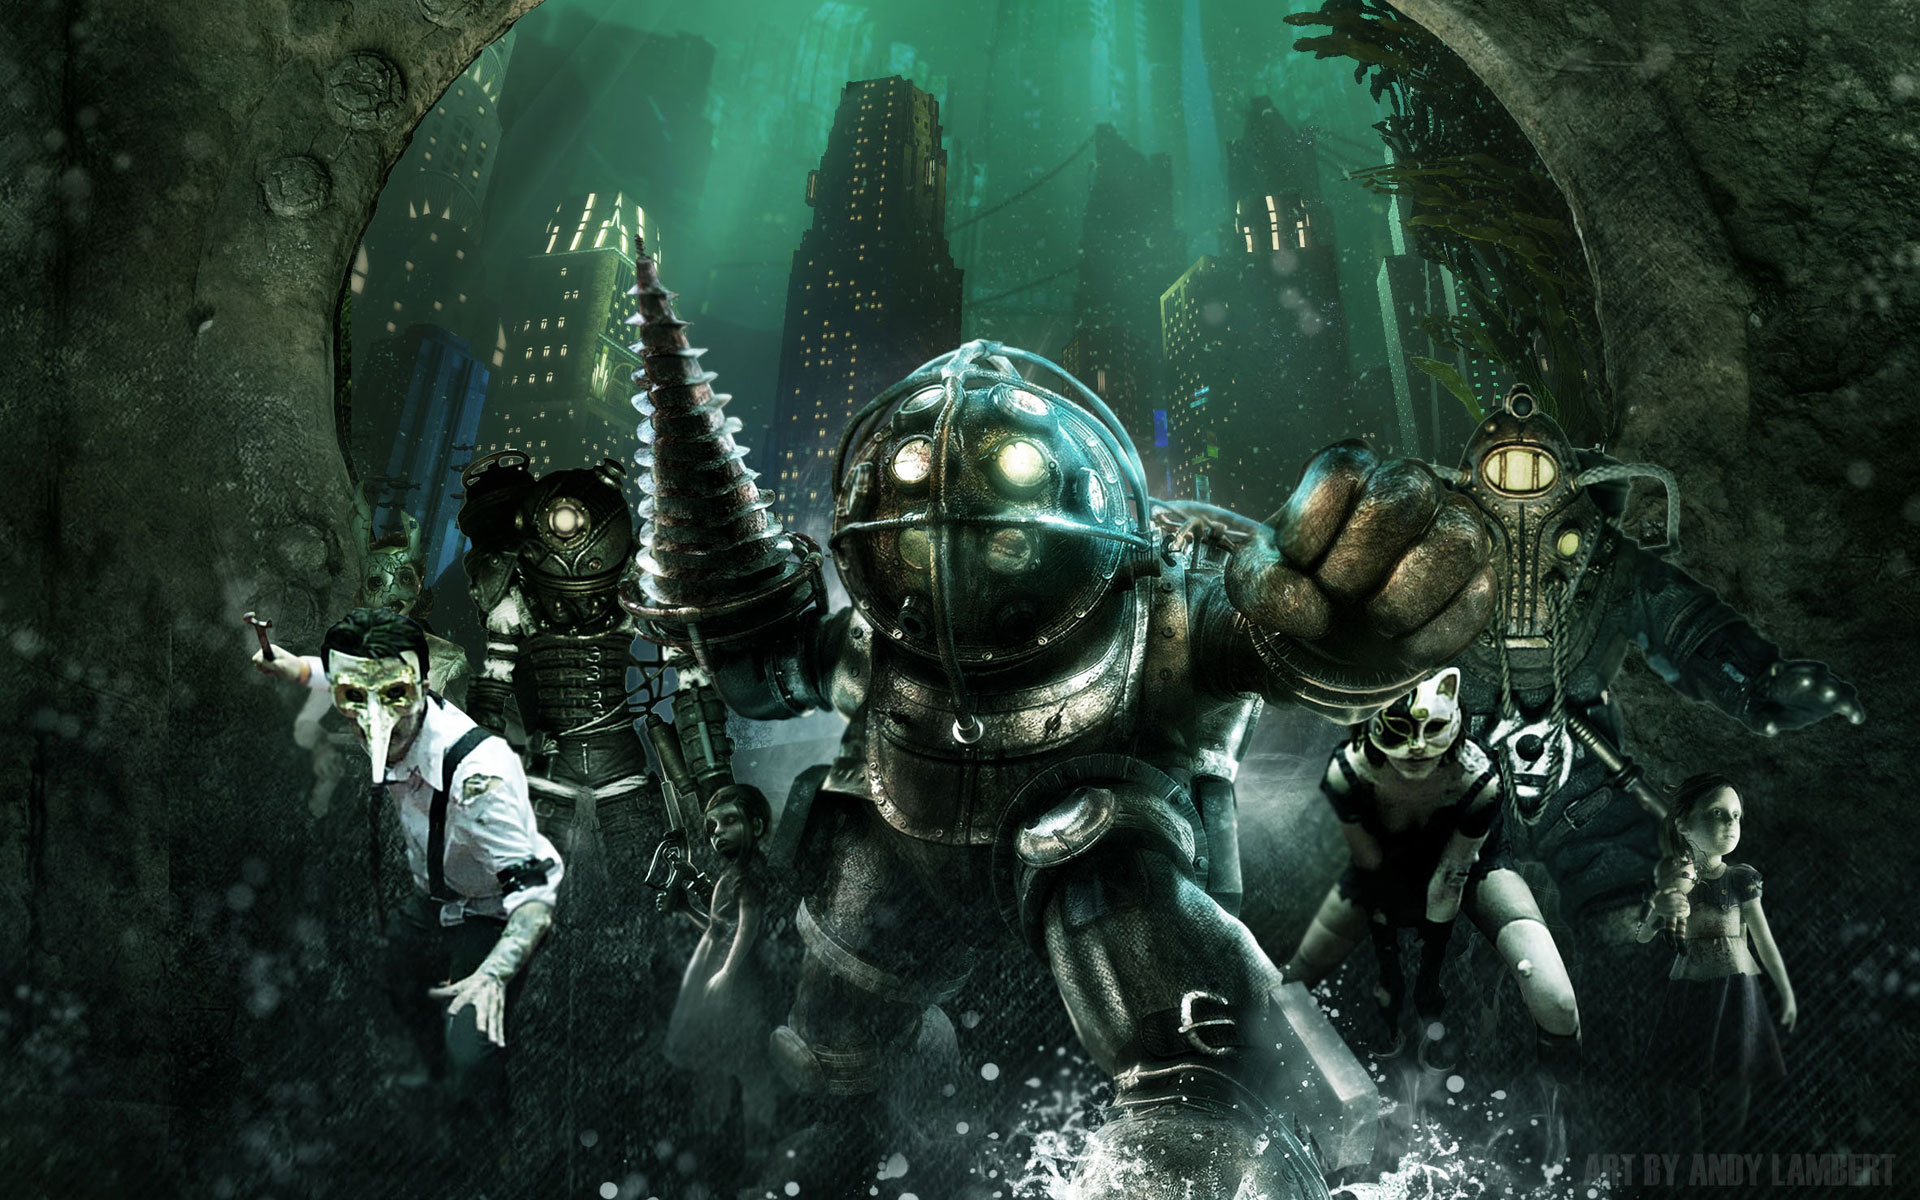 download free bioshock the collection xbox one